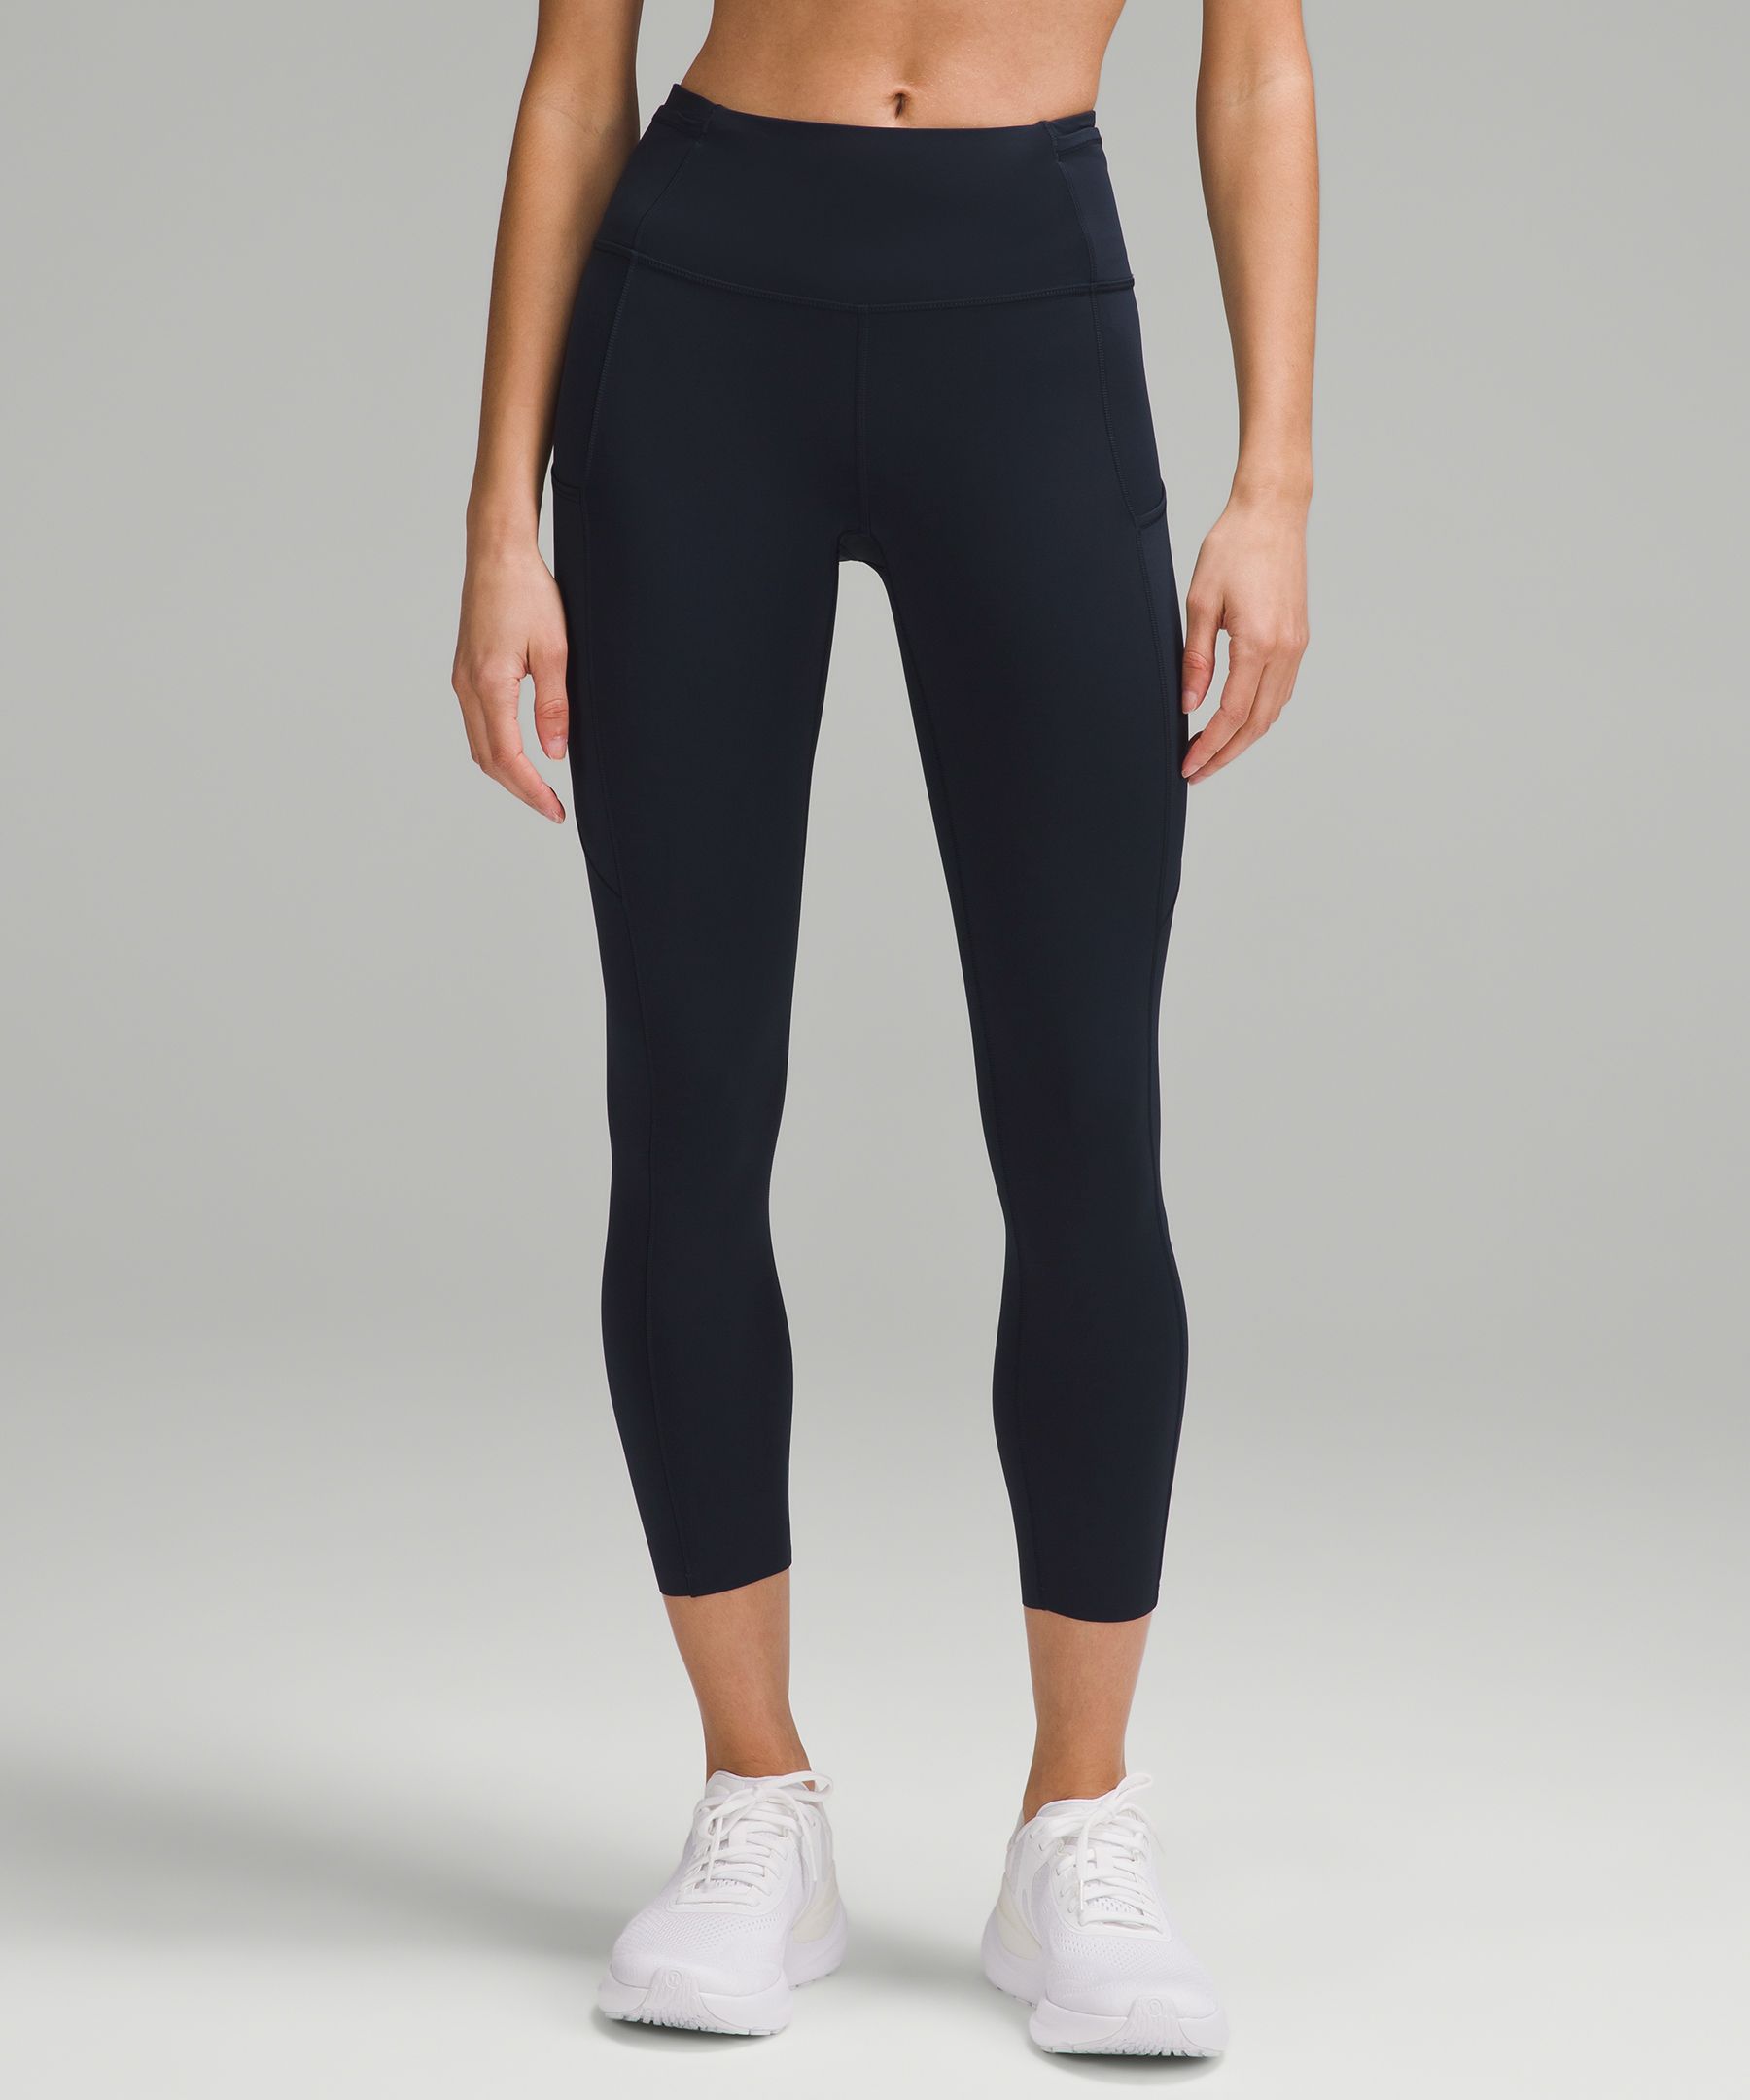 Fast and Free High-Rise Crop 23, Leggings